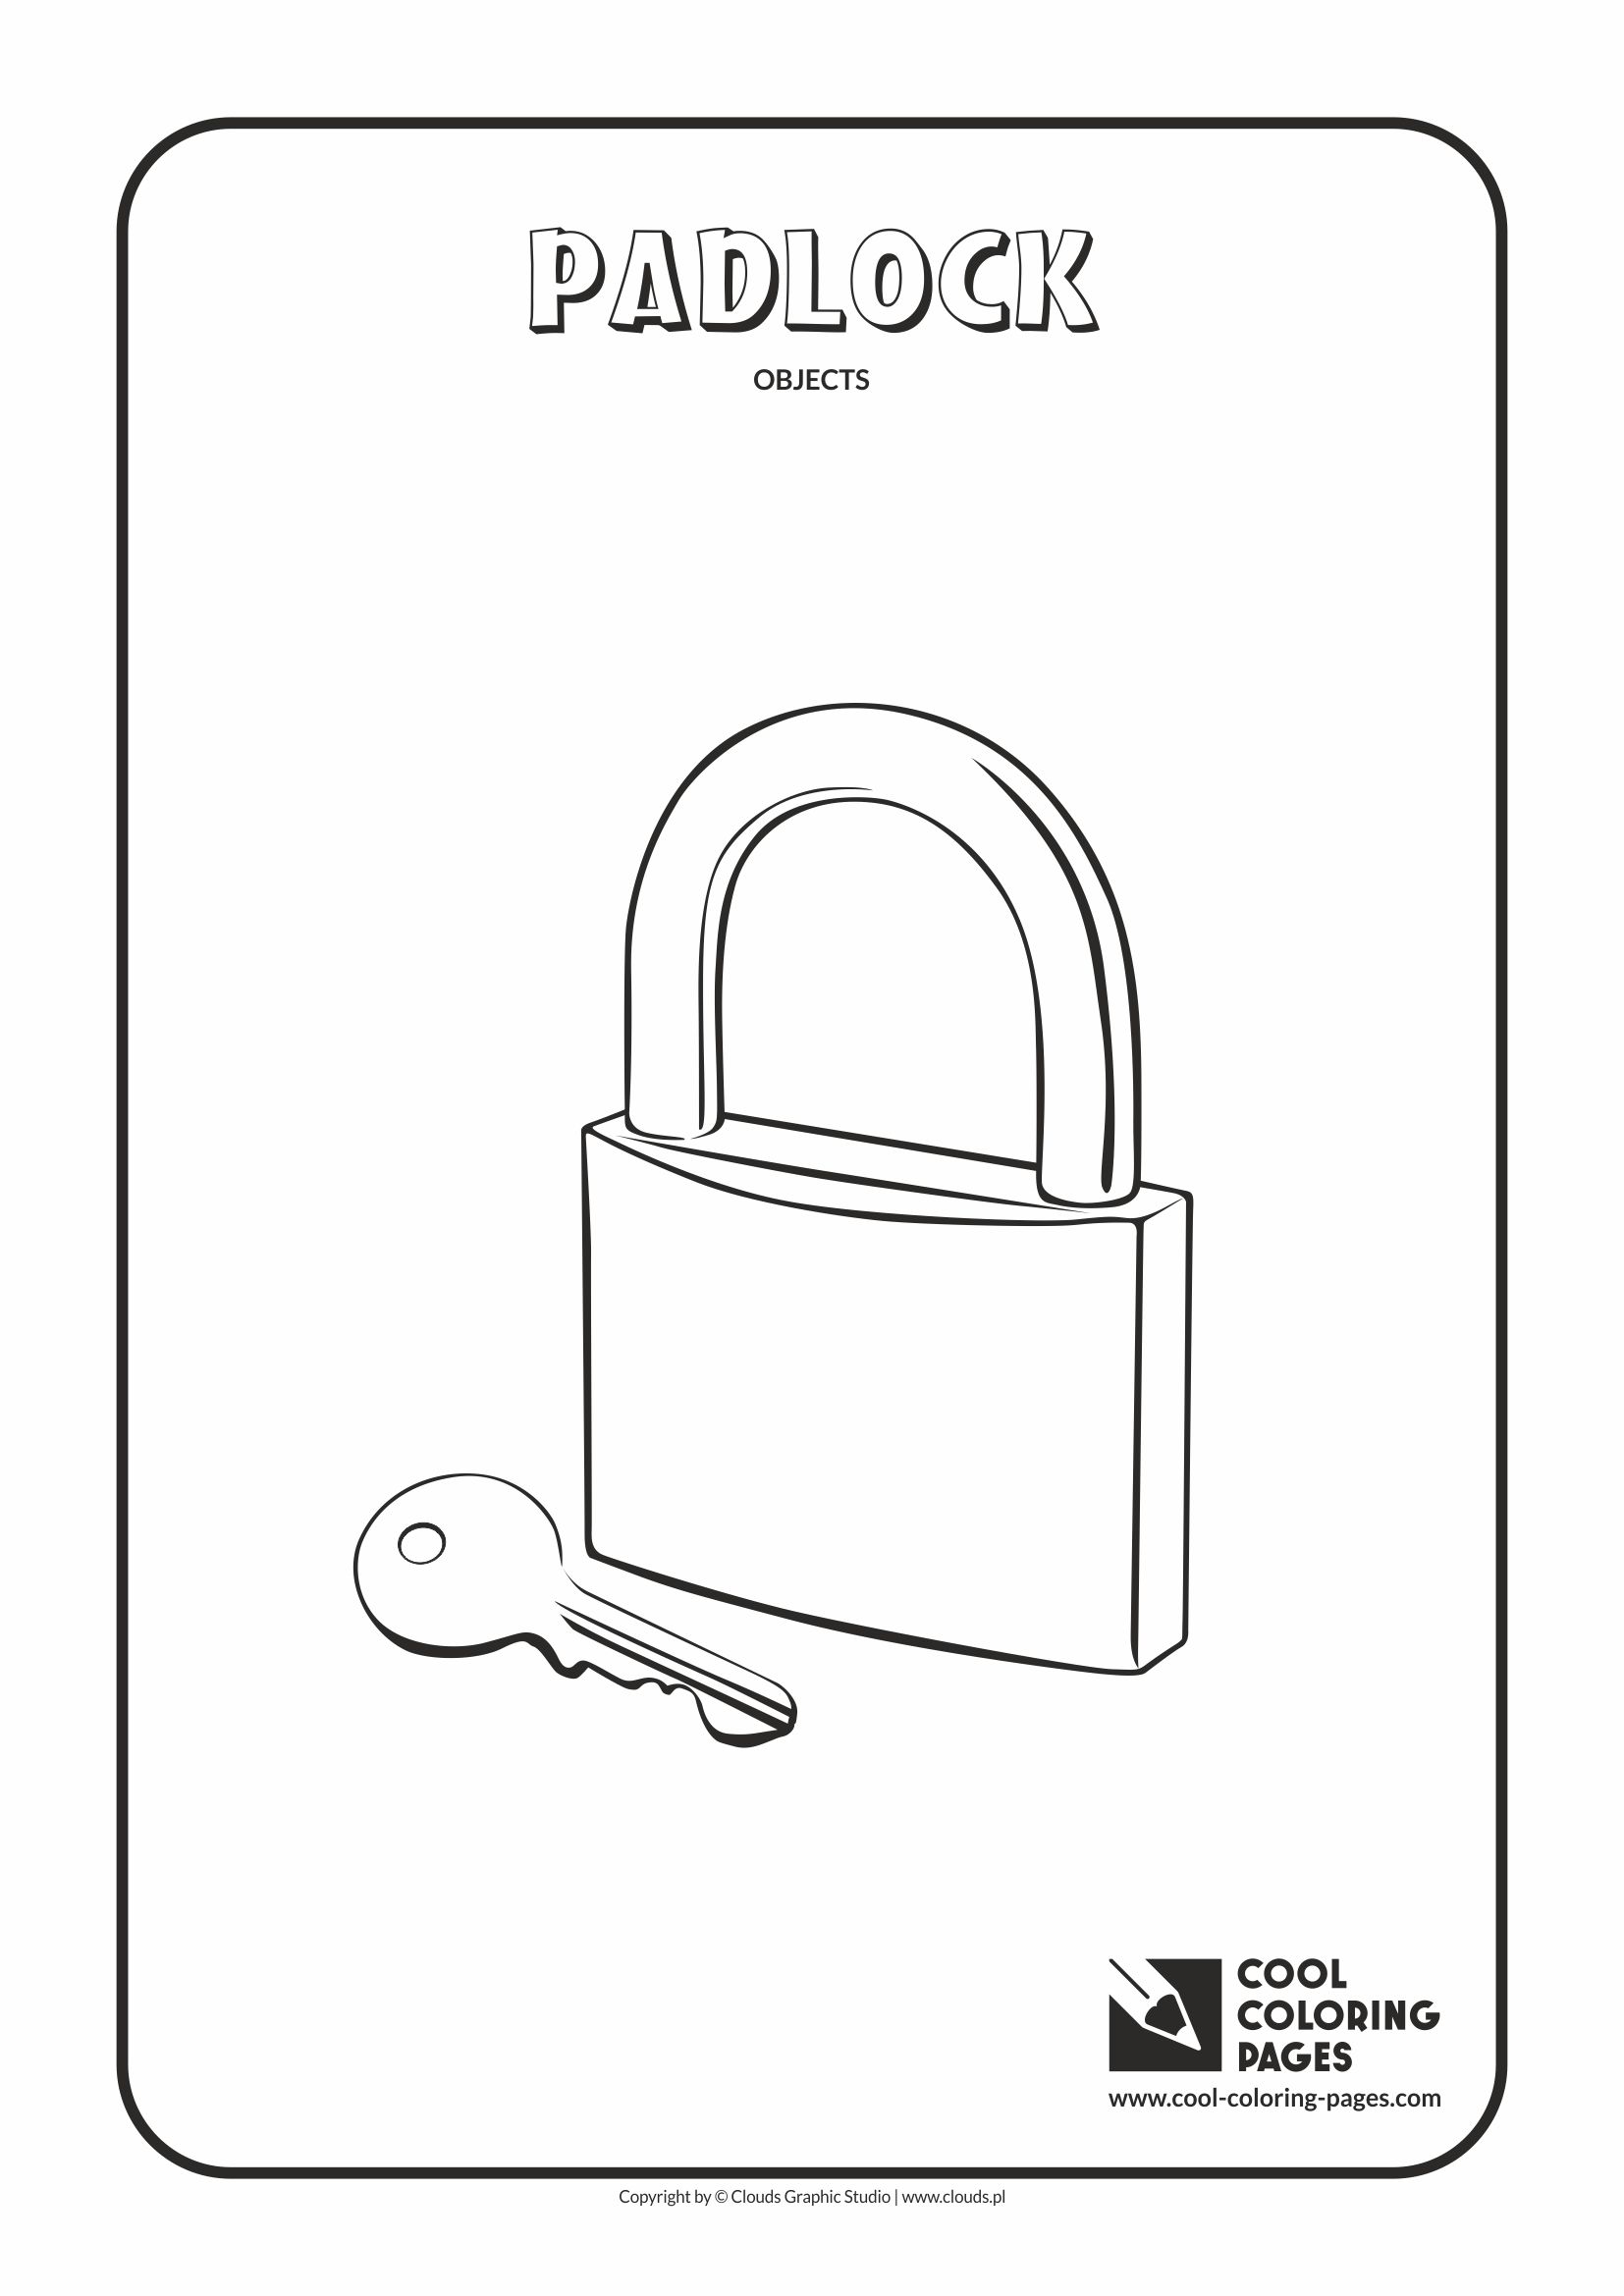 Cool Coloring Pages - Coloring objects / Padlock